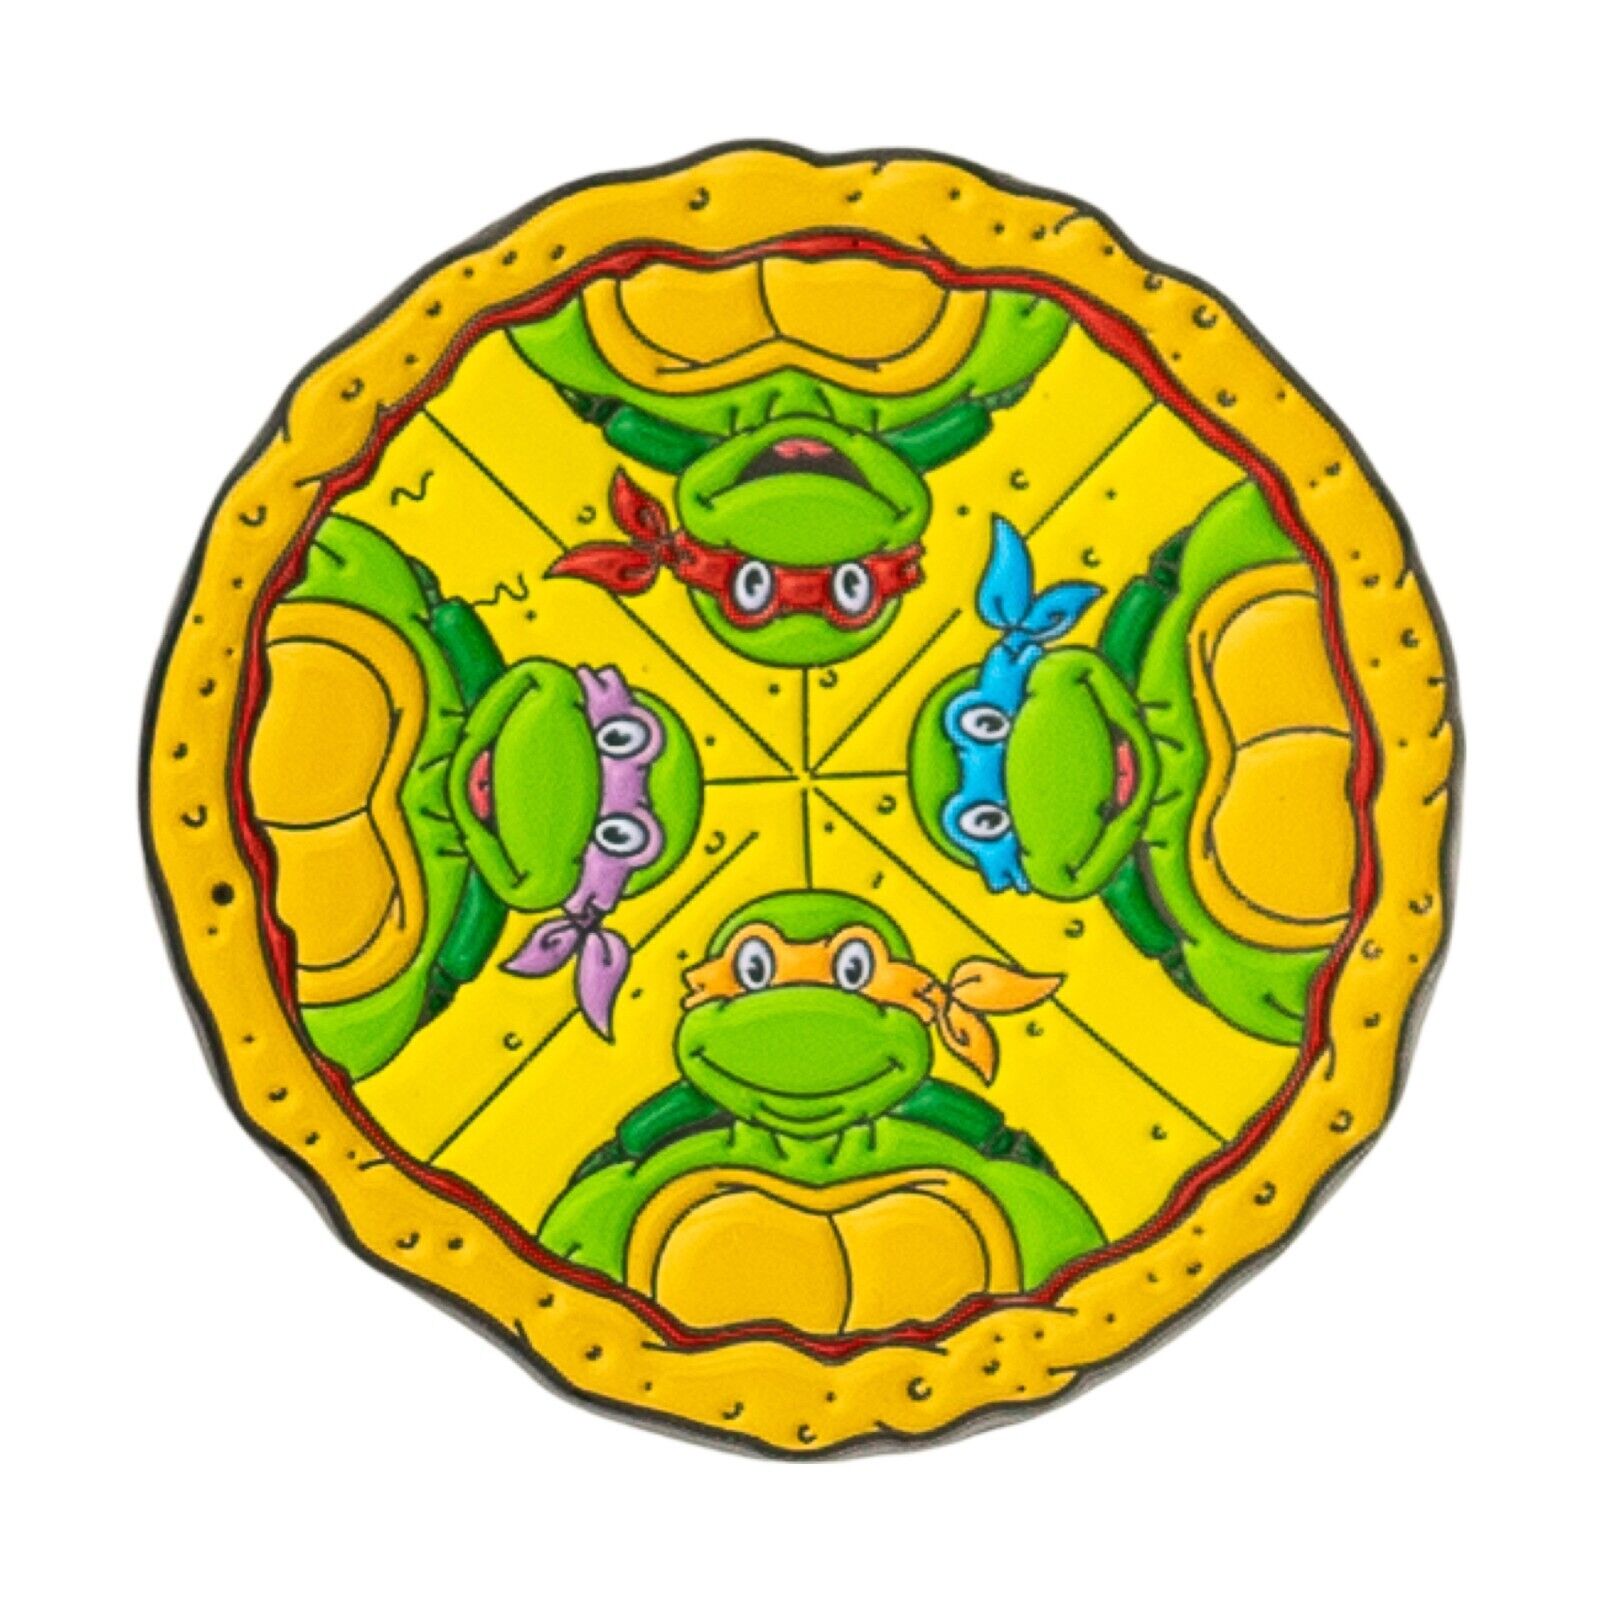 TMNT all 4 Turtles Pizza Pin Brooch Label Classic Cartoon Style